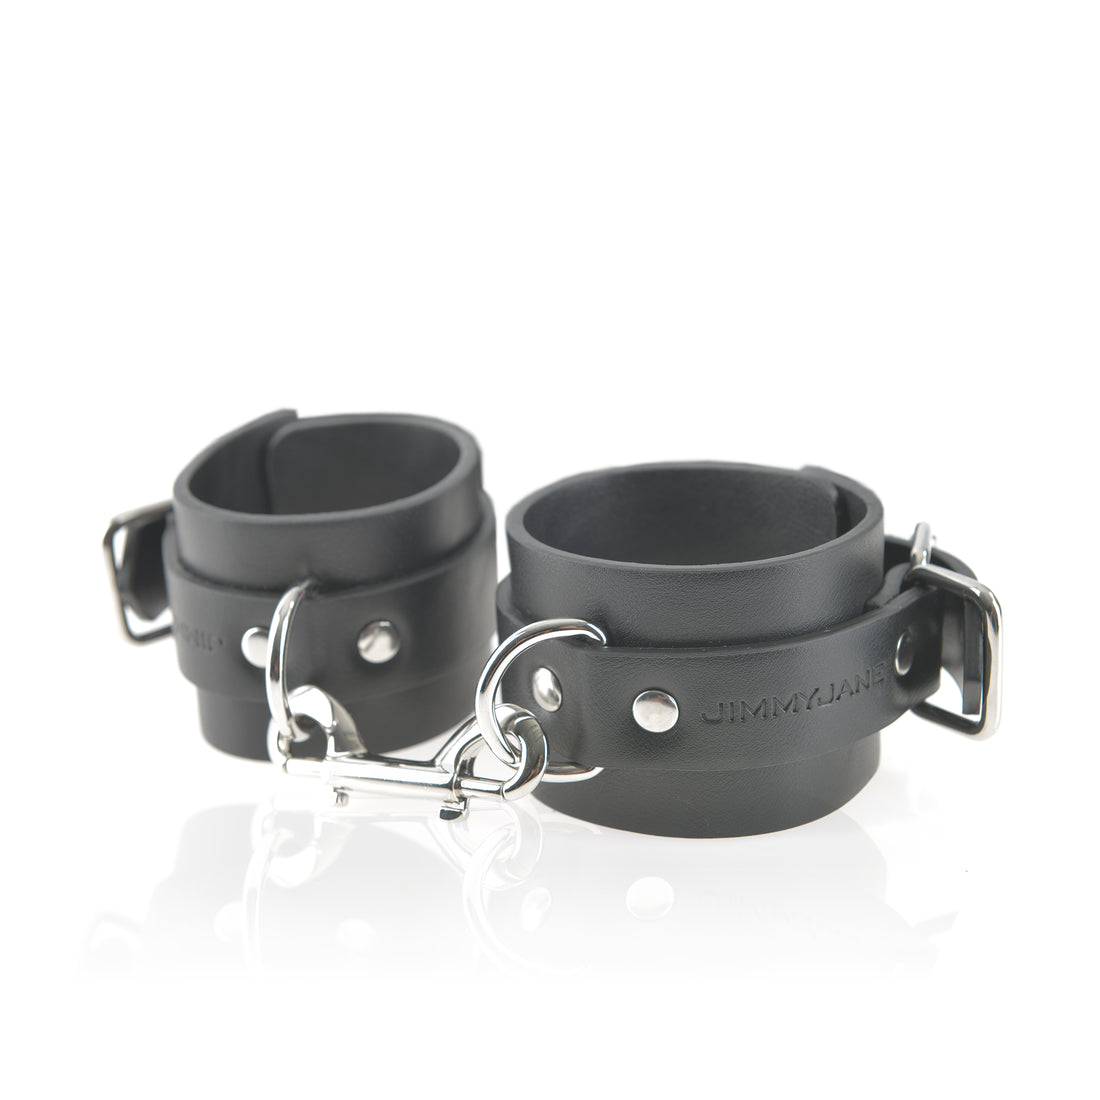 Vegan leather Fascination handcuffs with silver metal hardware